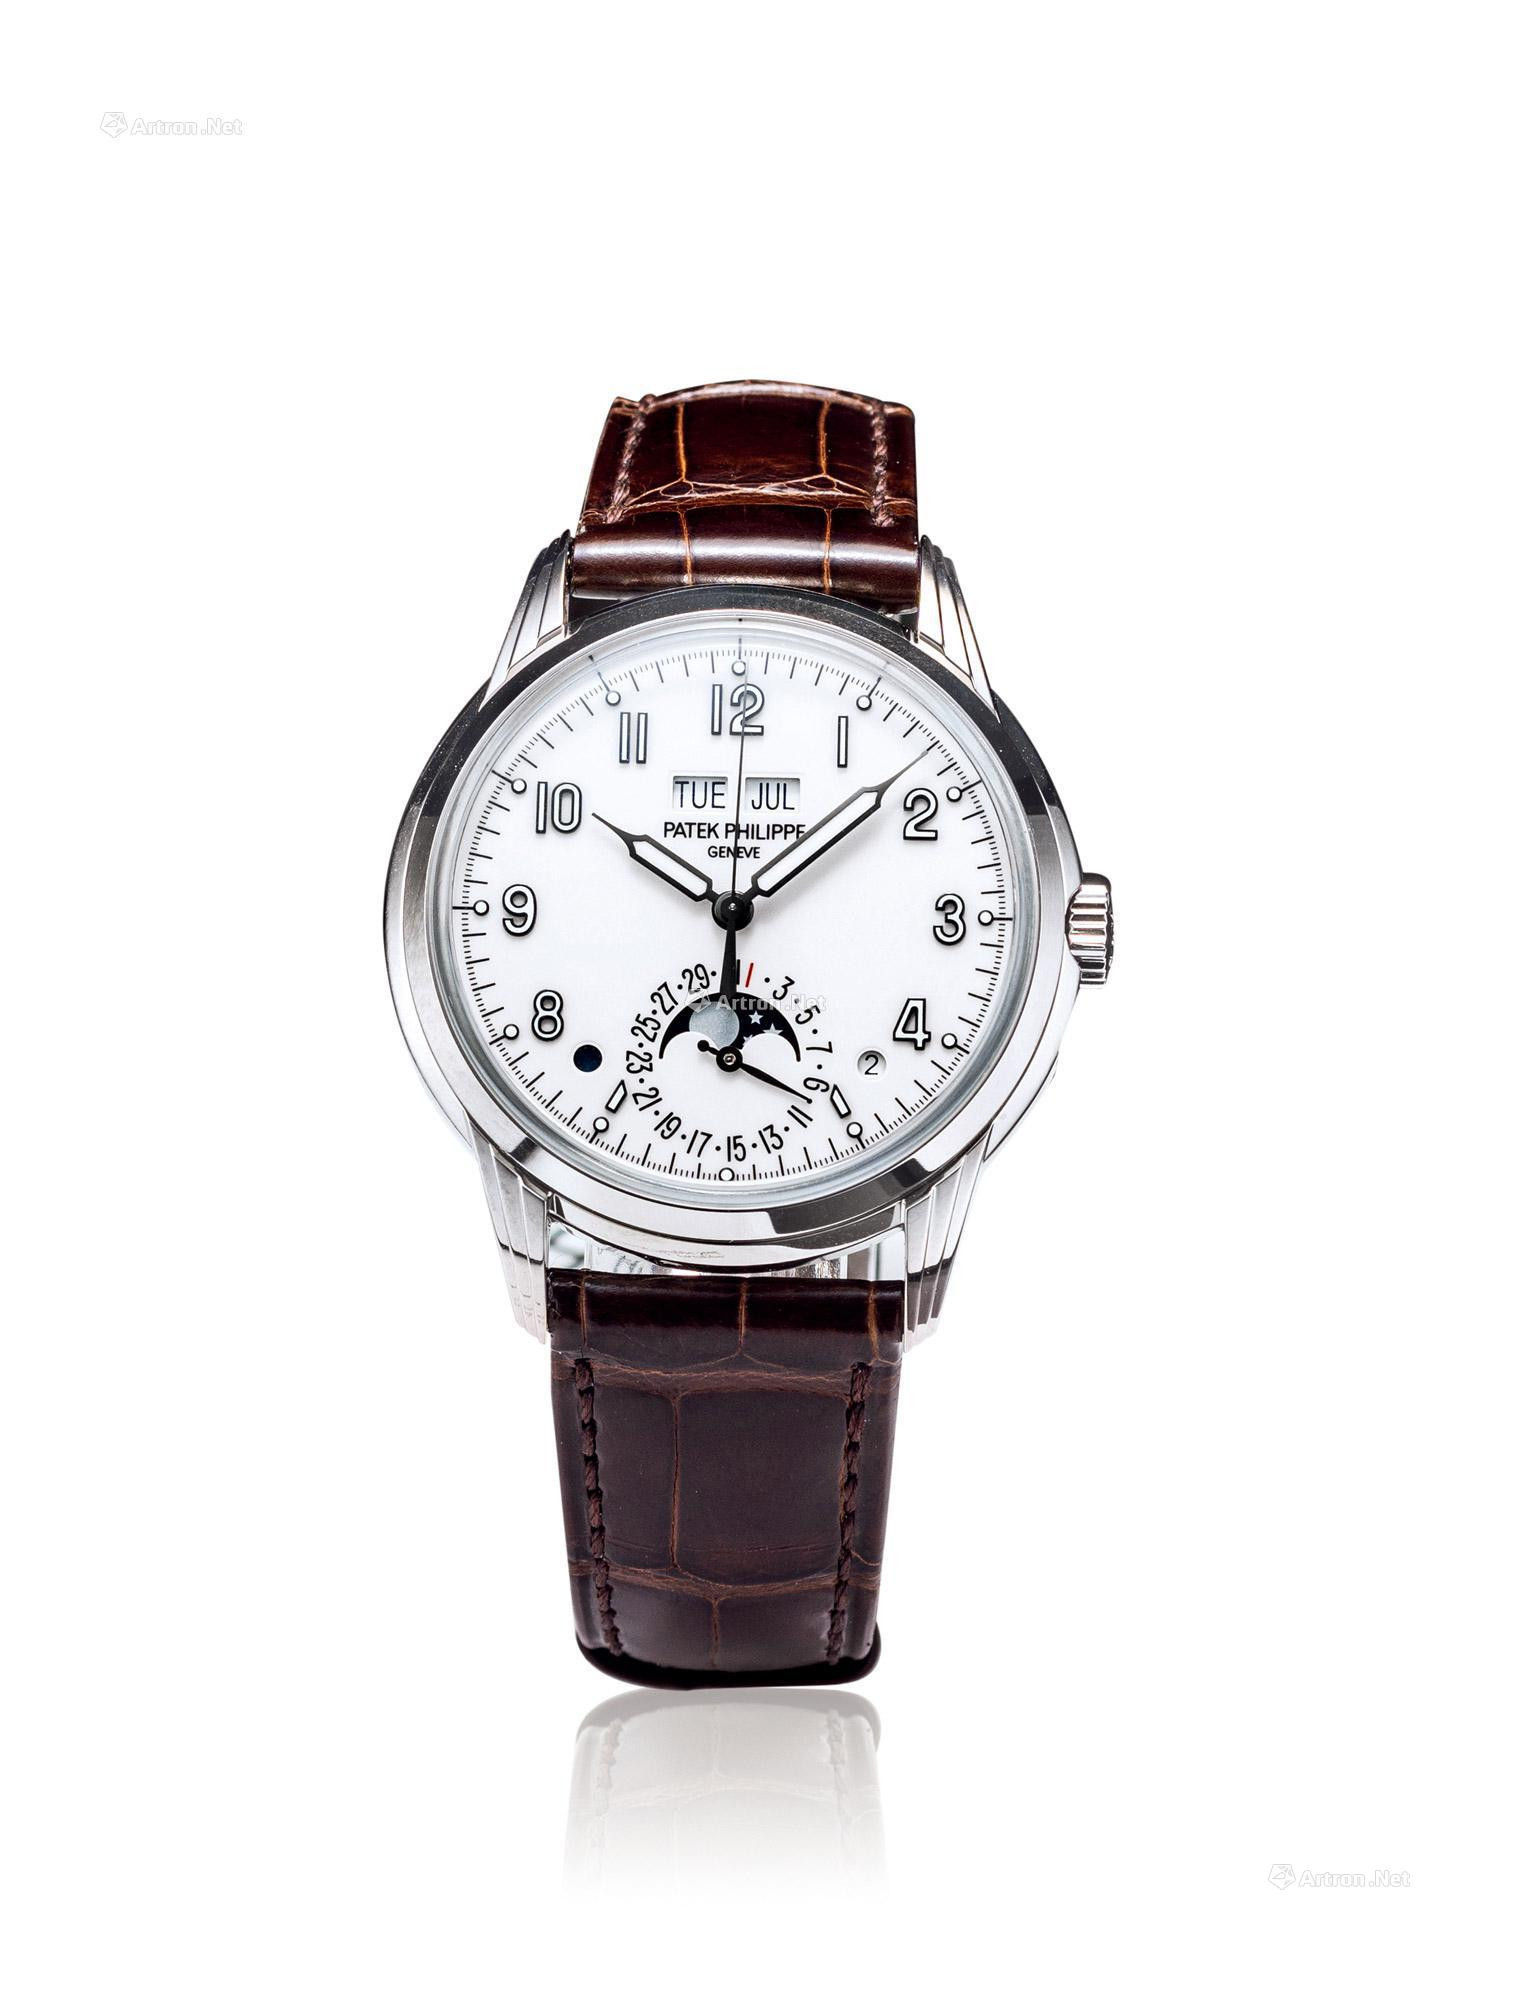 PATEK PHILIPPE  A VERY FINE WHITE GOLD PERPETUAL CALENDAR AUTOMATIC WRISTWATCH， WITH DATE， DAY， MONTH， DAY/NIGHT， LEAP YEAR AND MOON PHASES INDICATORS， CERTIFICATE OF ORIGIN AND PRESENTATION BOX